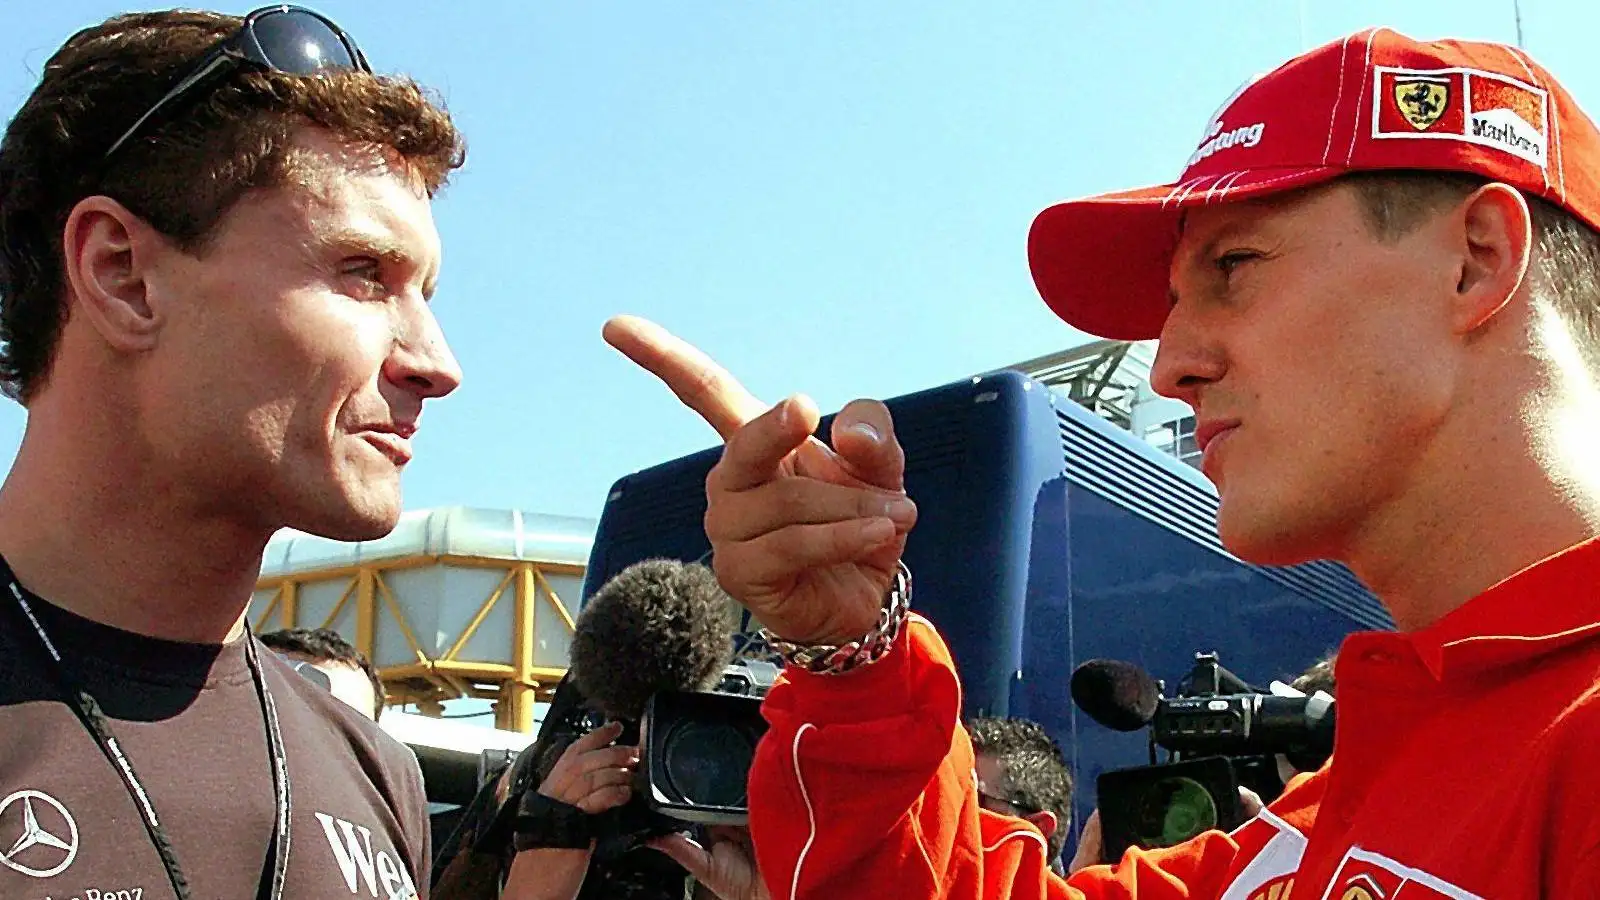 David Coulthard and Michael Schumacher in discussion at the 2004 San Marino Grand Prix.